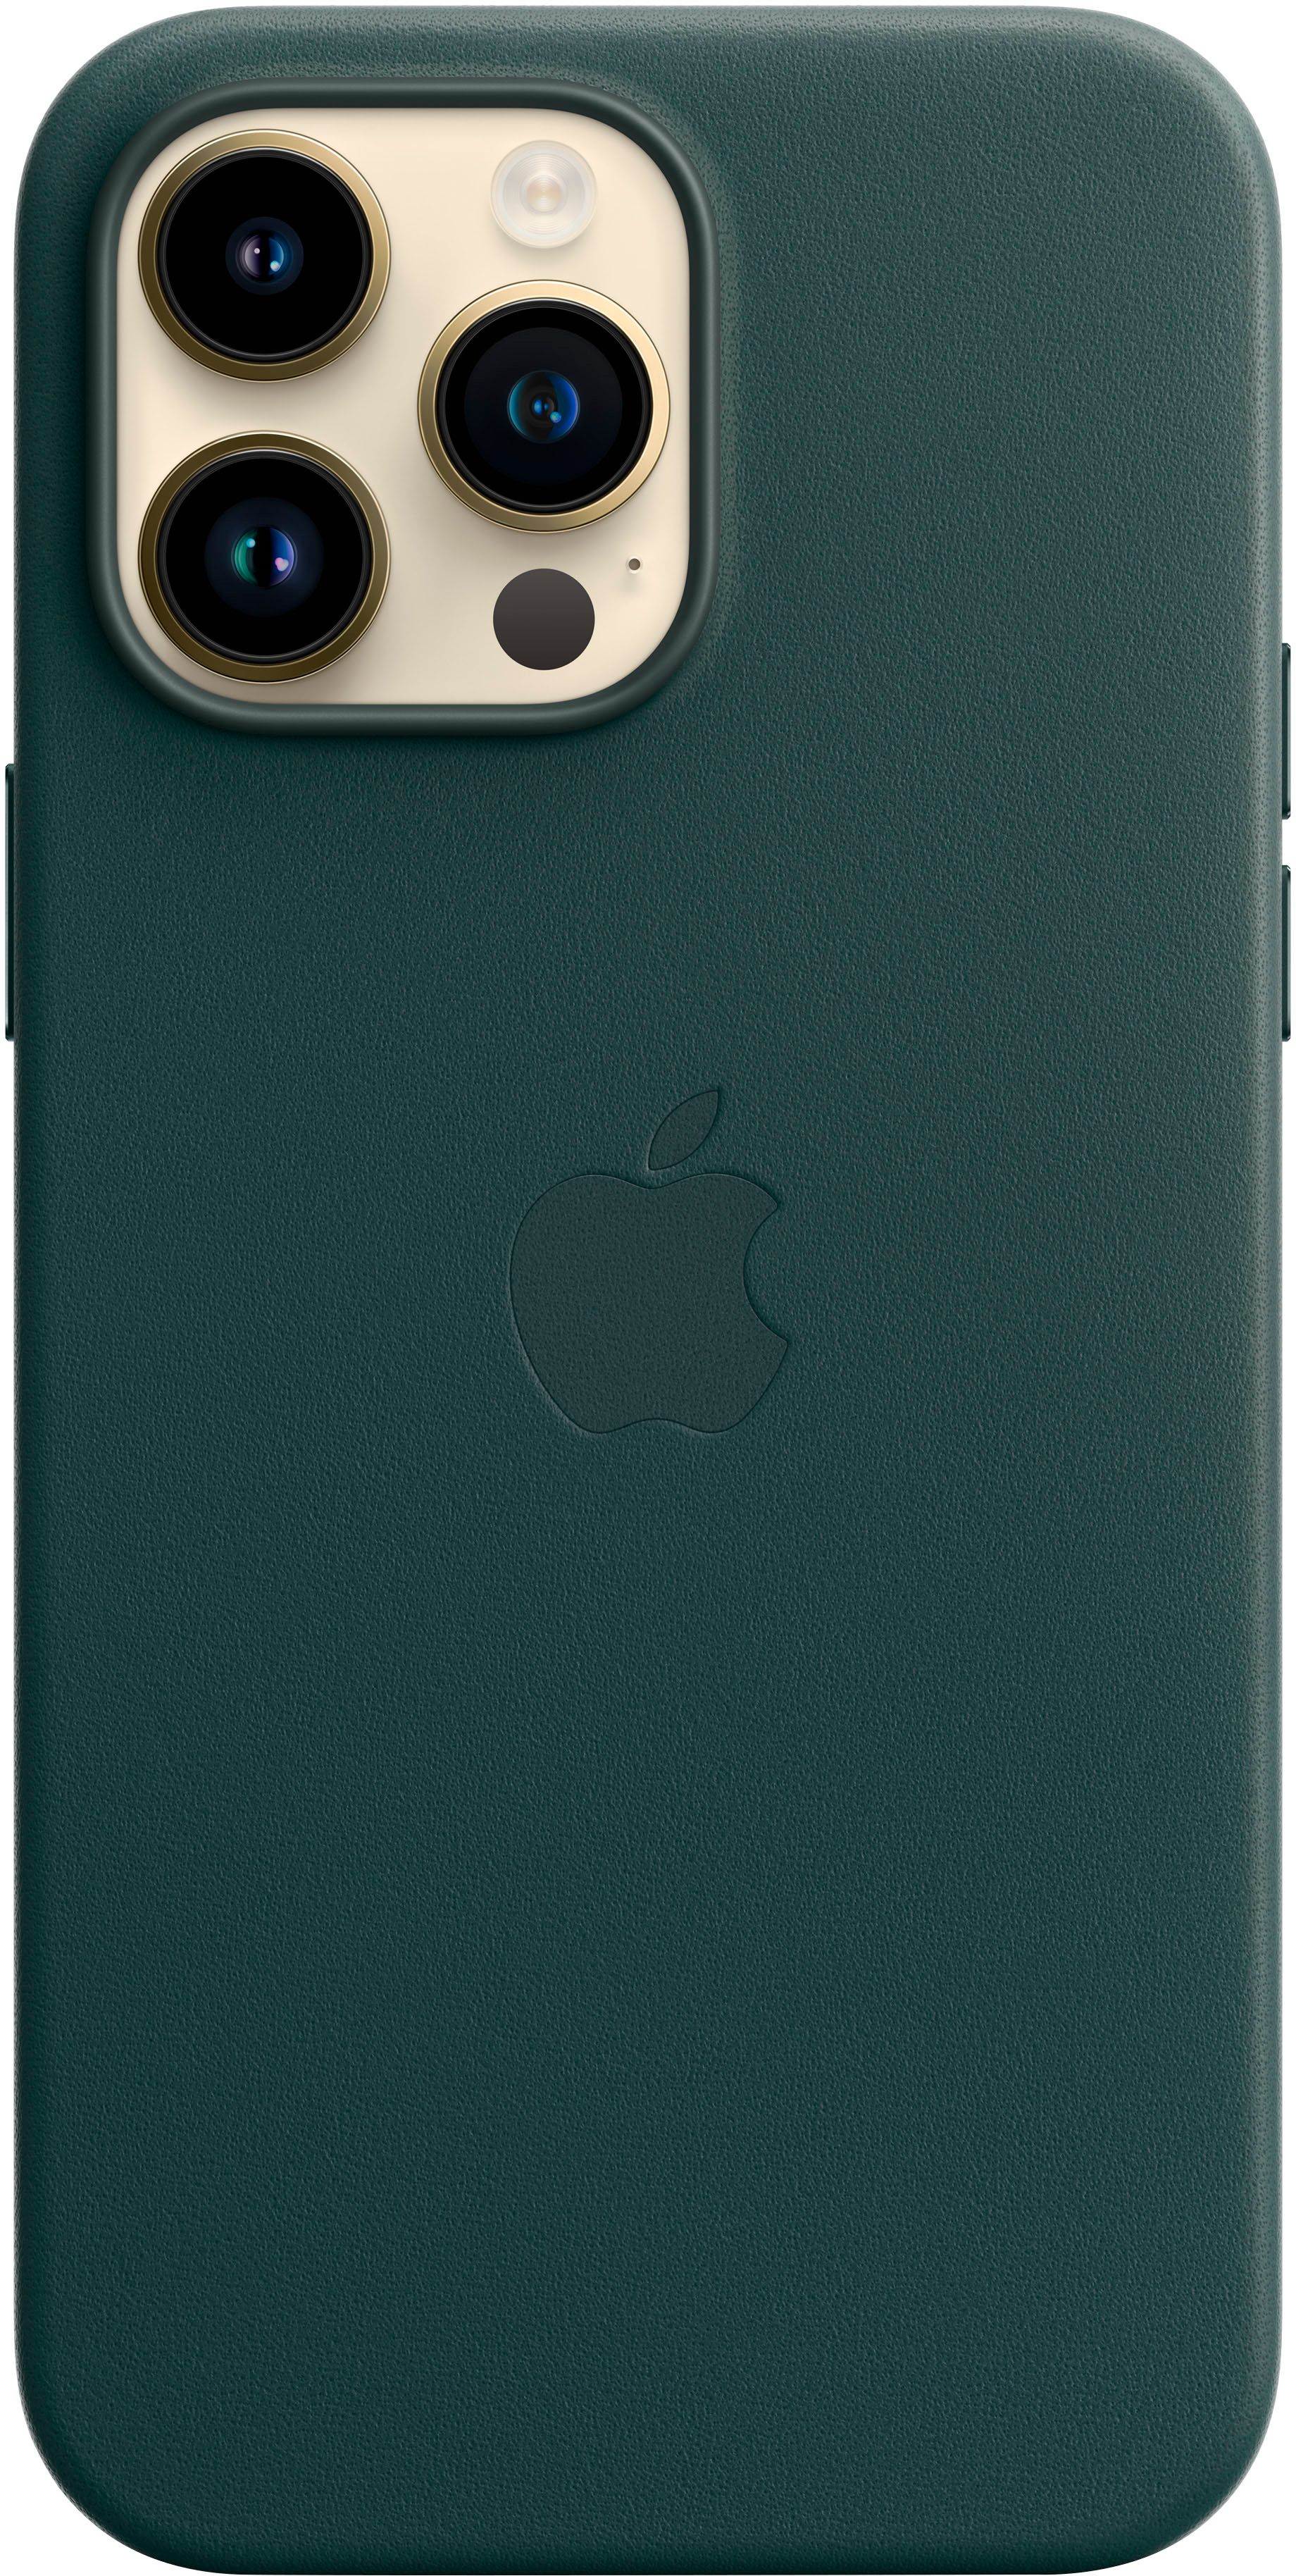 36 Best Designer iPhone Cases For Protection & Style